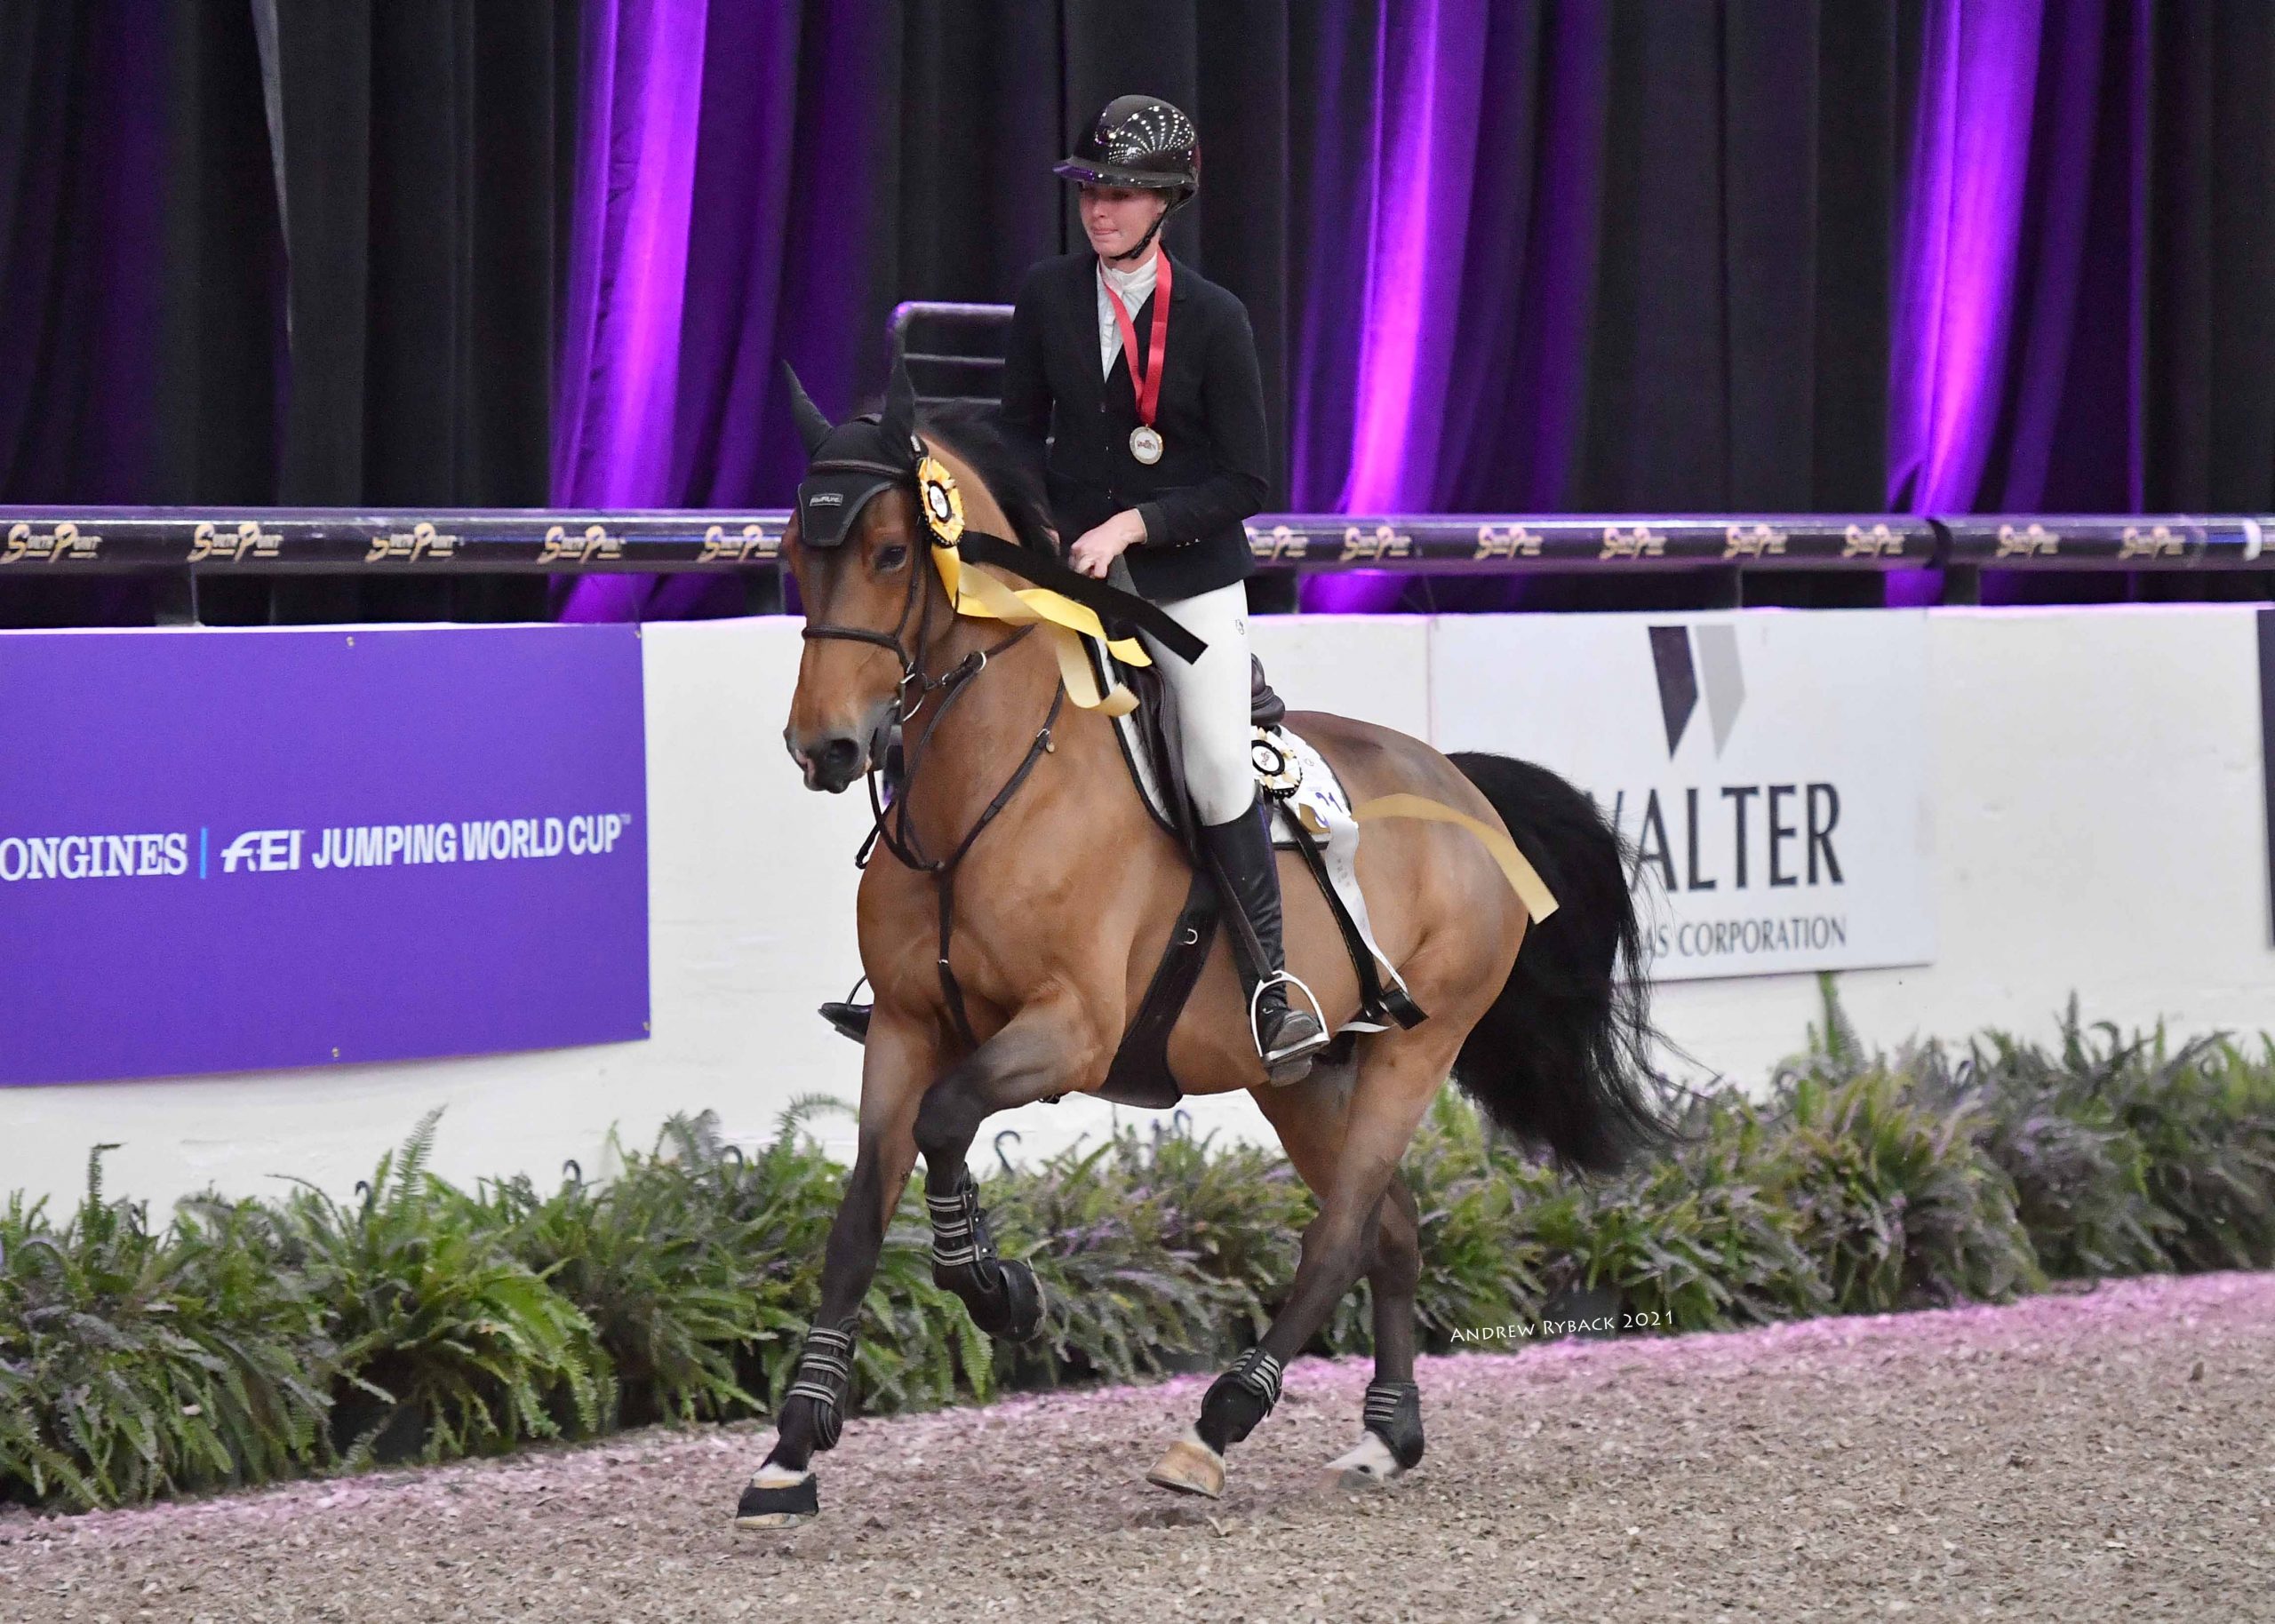 Great start for Darknight and Hunter Holloway taking the 3rd place at The Las Vegas National Horse Show!